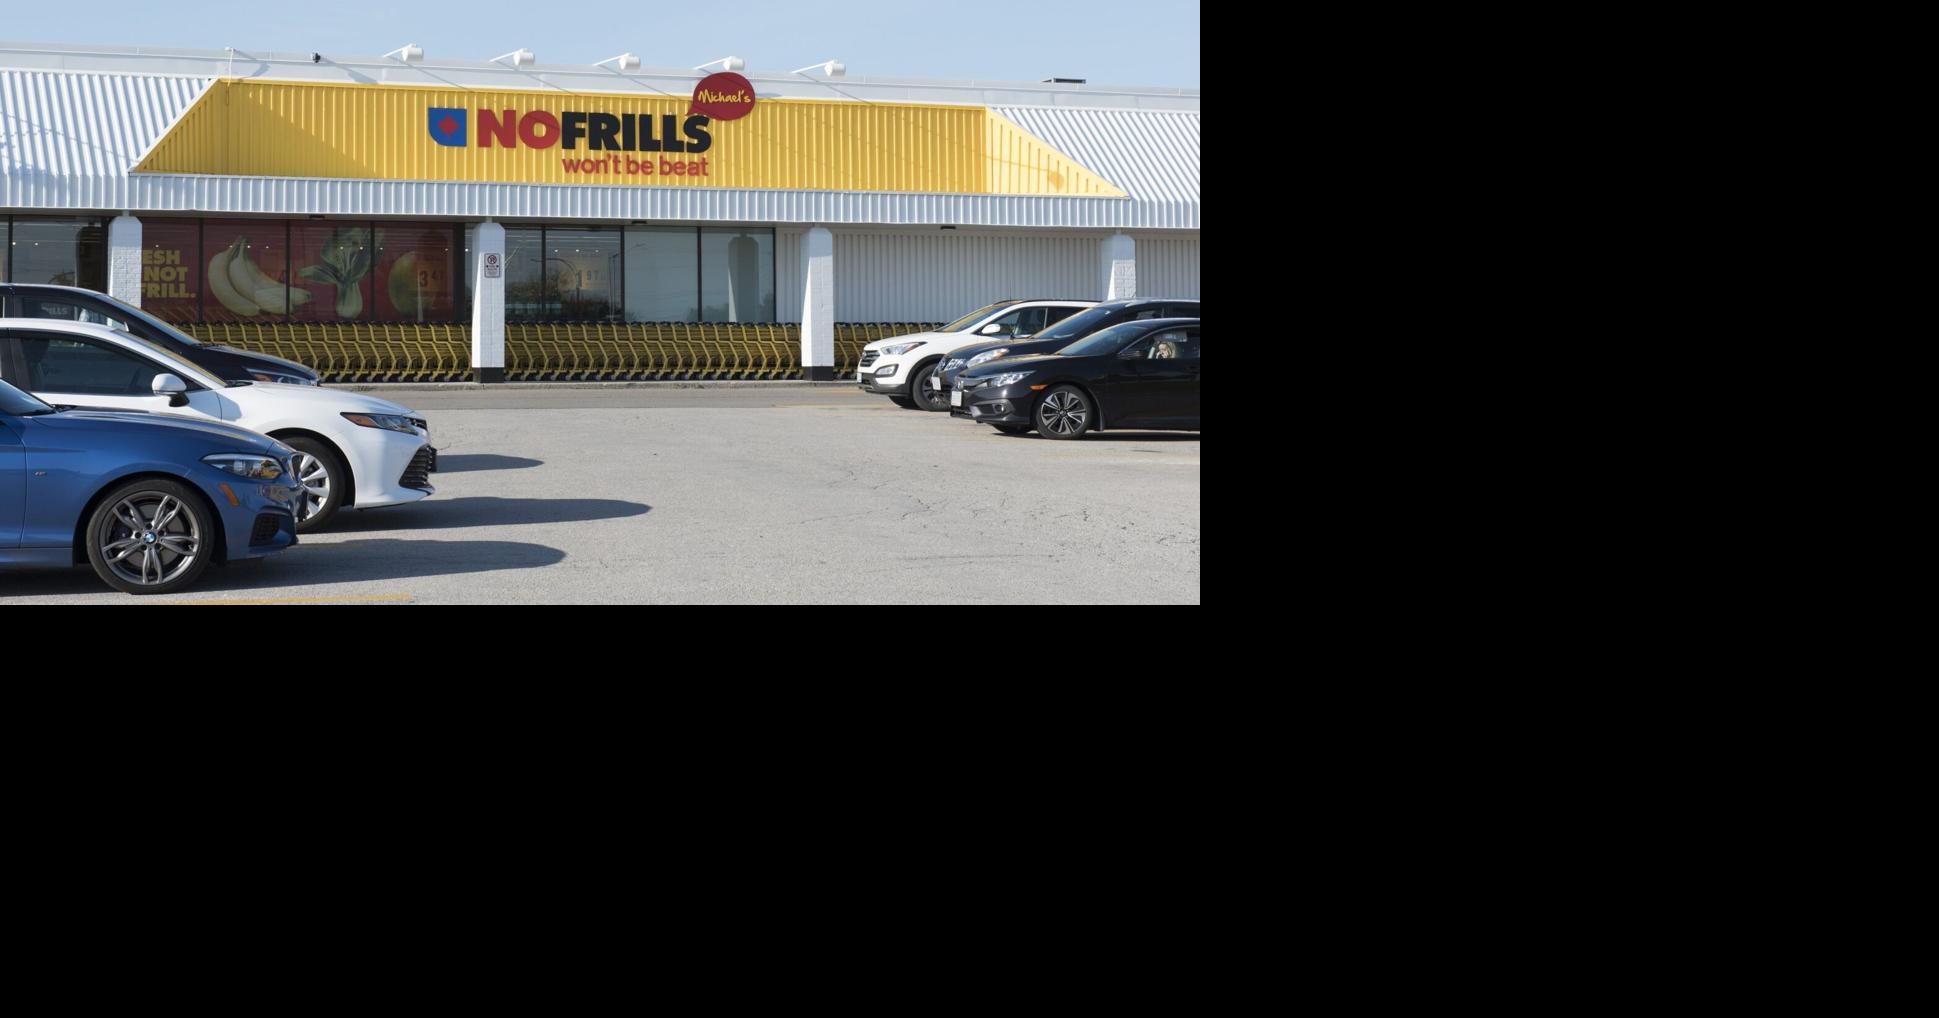 Toronto No Frills stores that would be impacted by strike, News